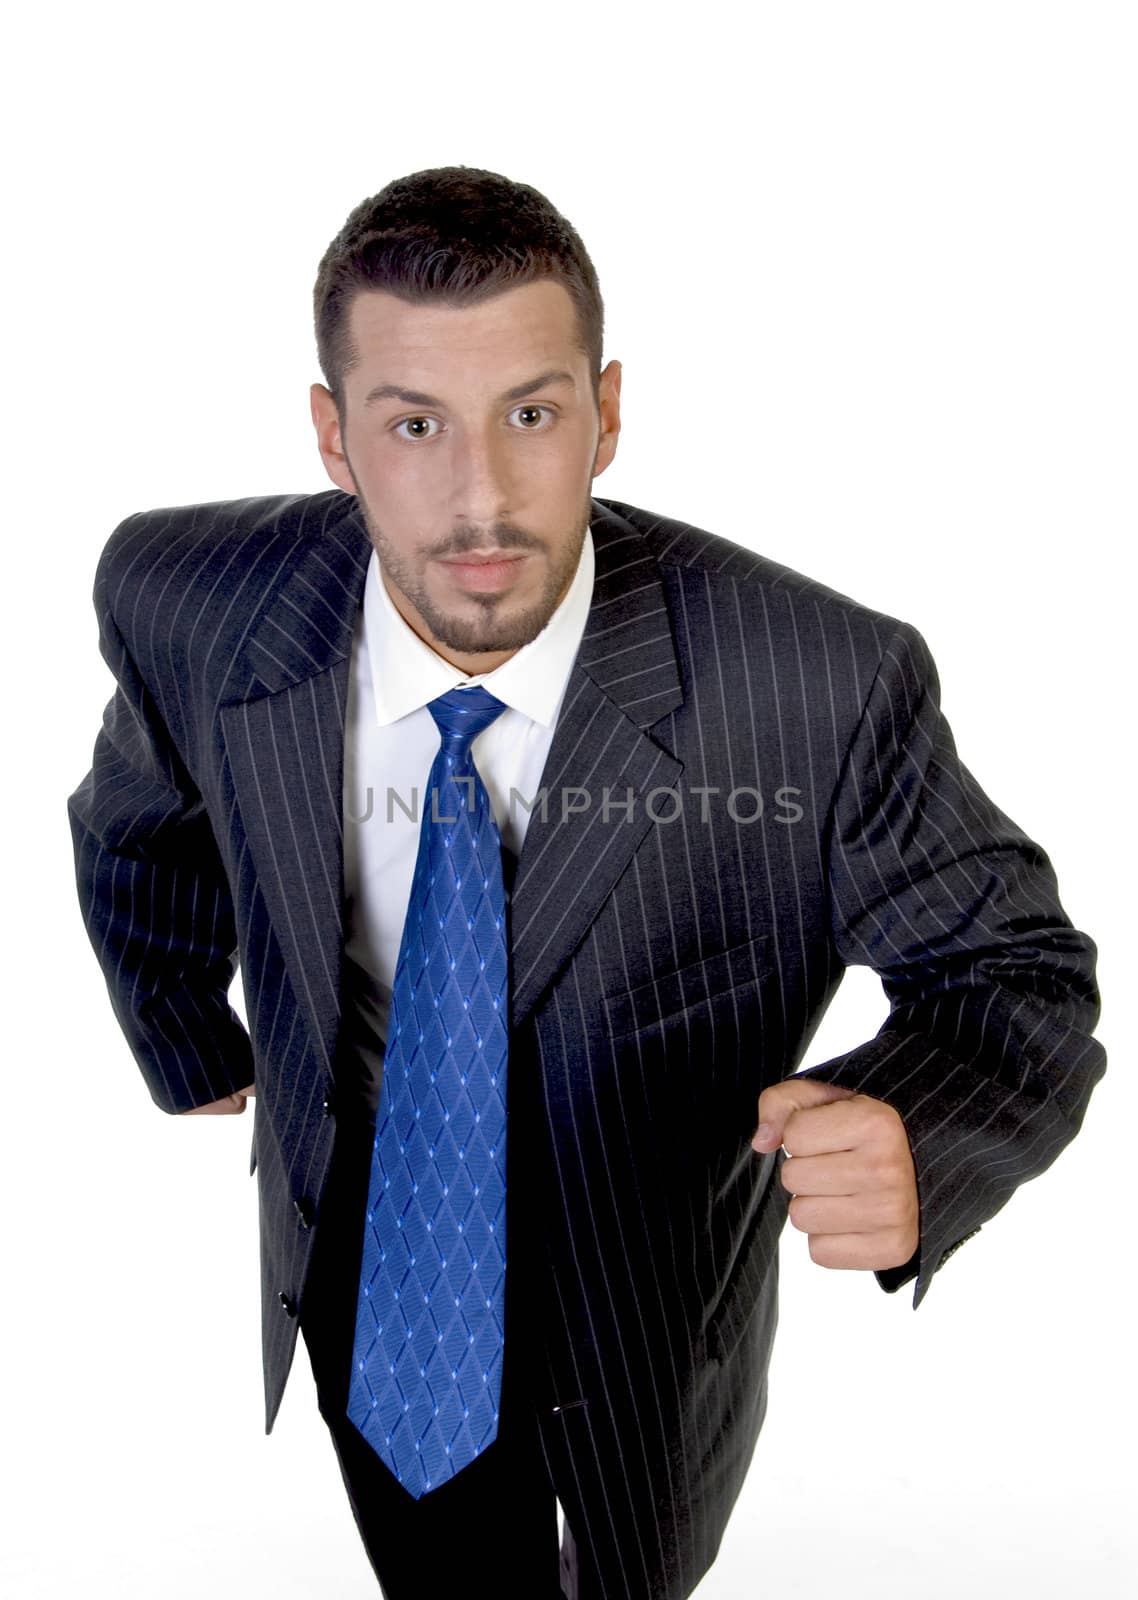 running young man against white background